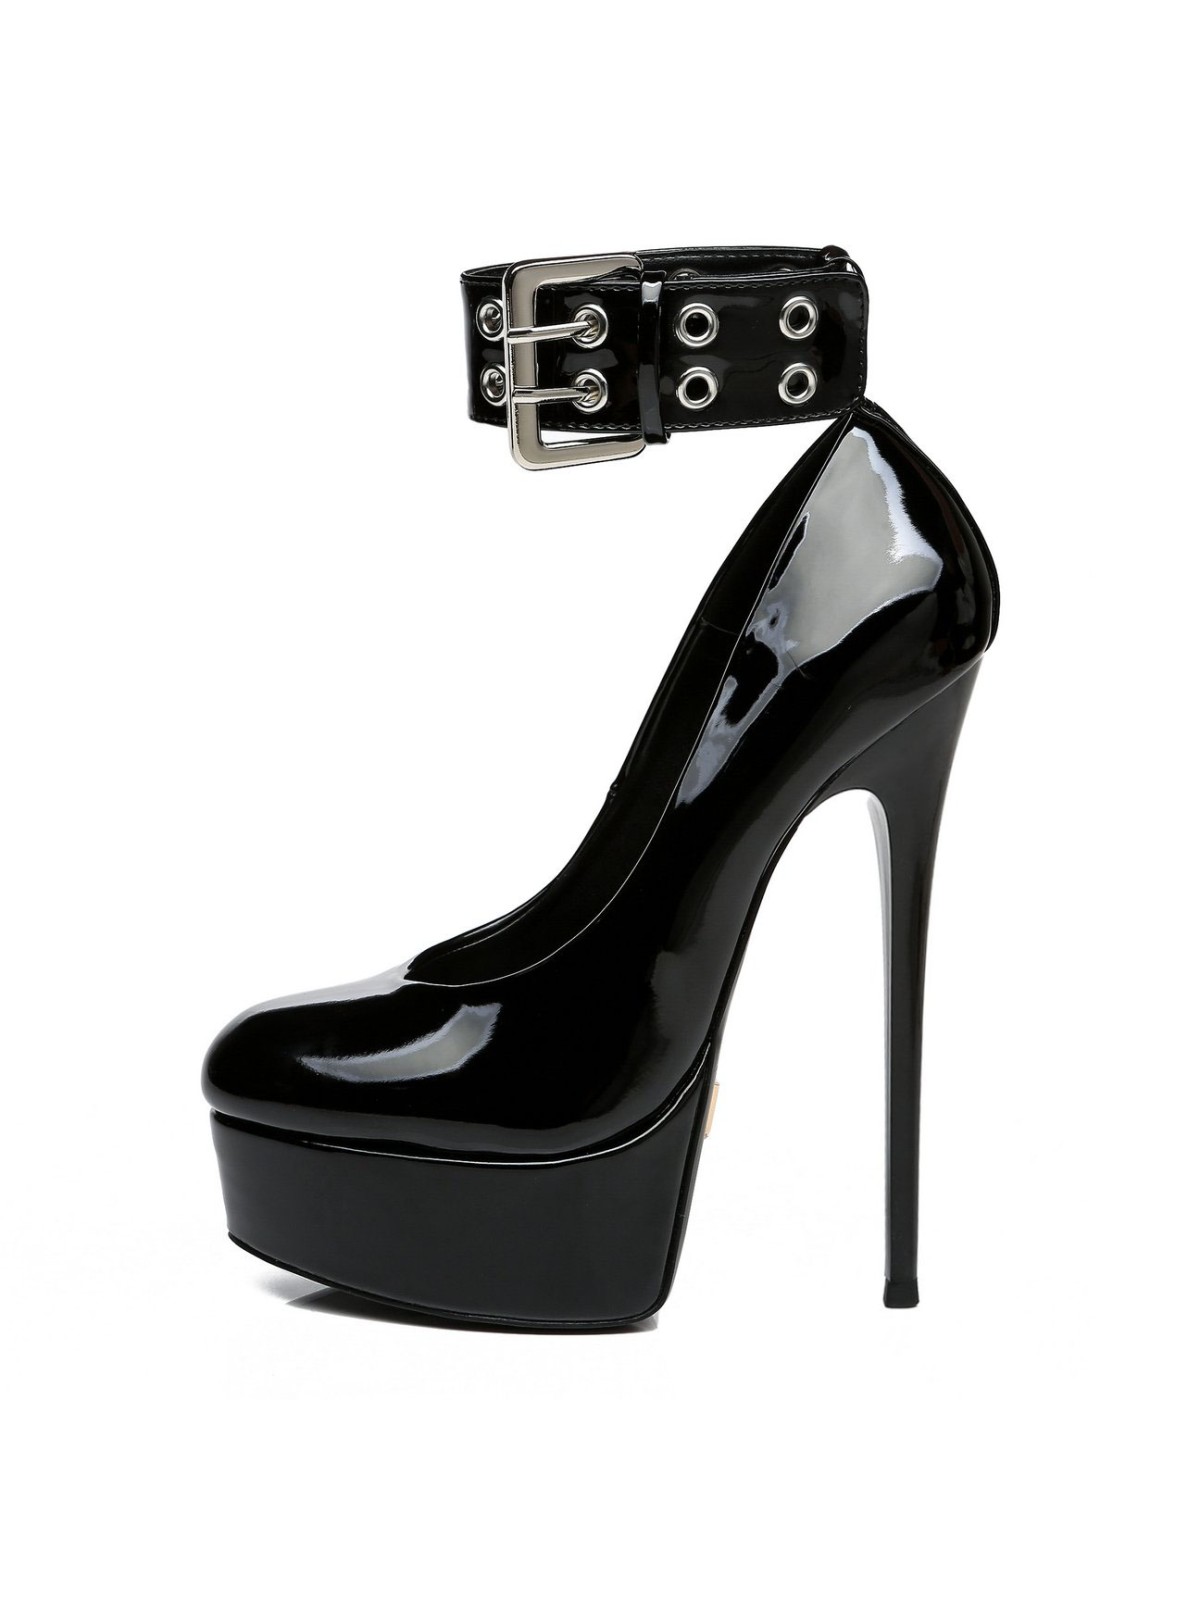 Giaro POSSESSED high heel pumps with ankle strap